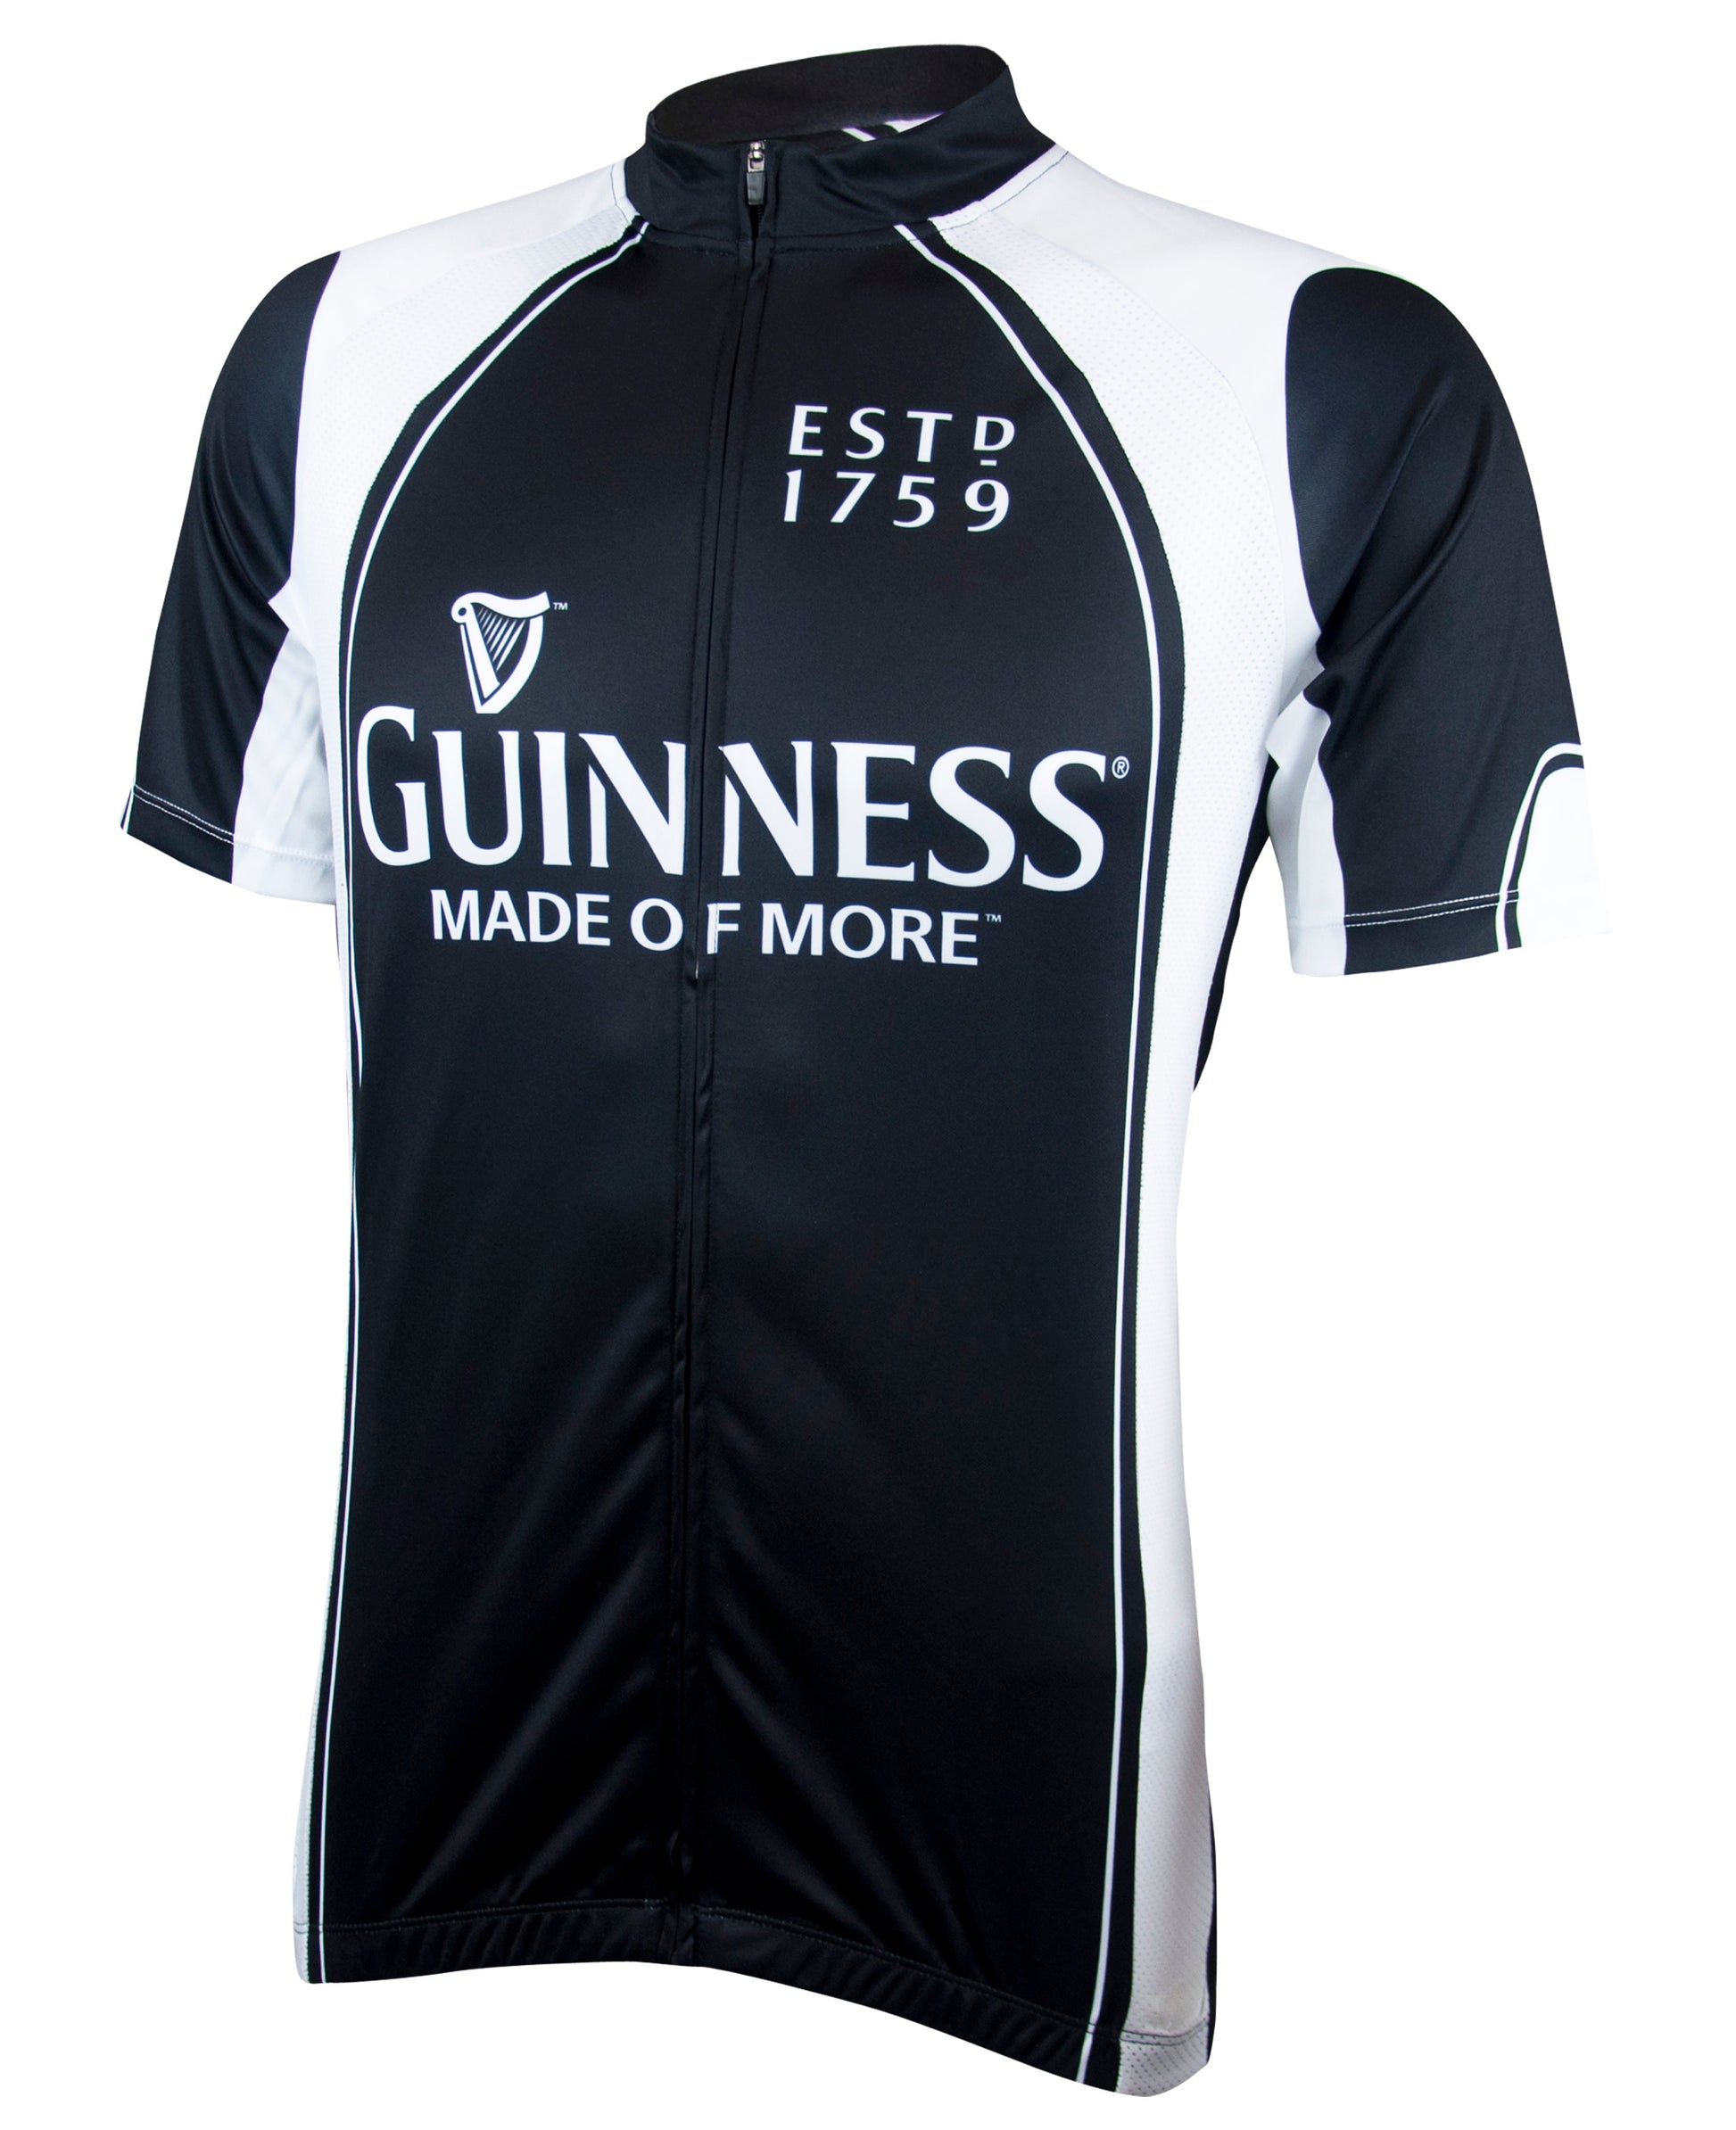 This high-performance Guinness UK Cycling Jersey is crafted with race cut design to maximize performance results.